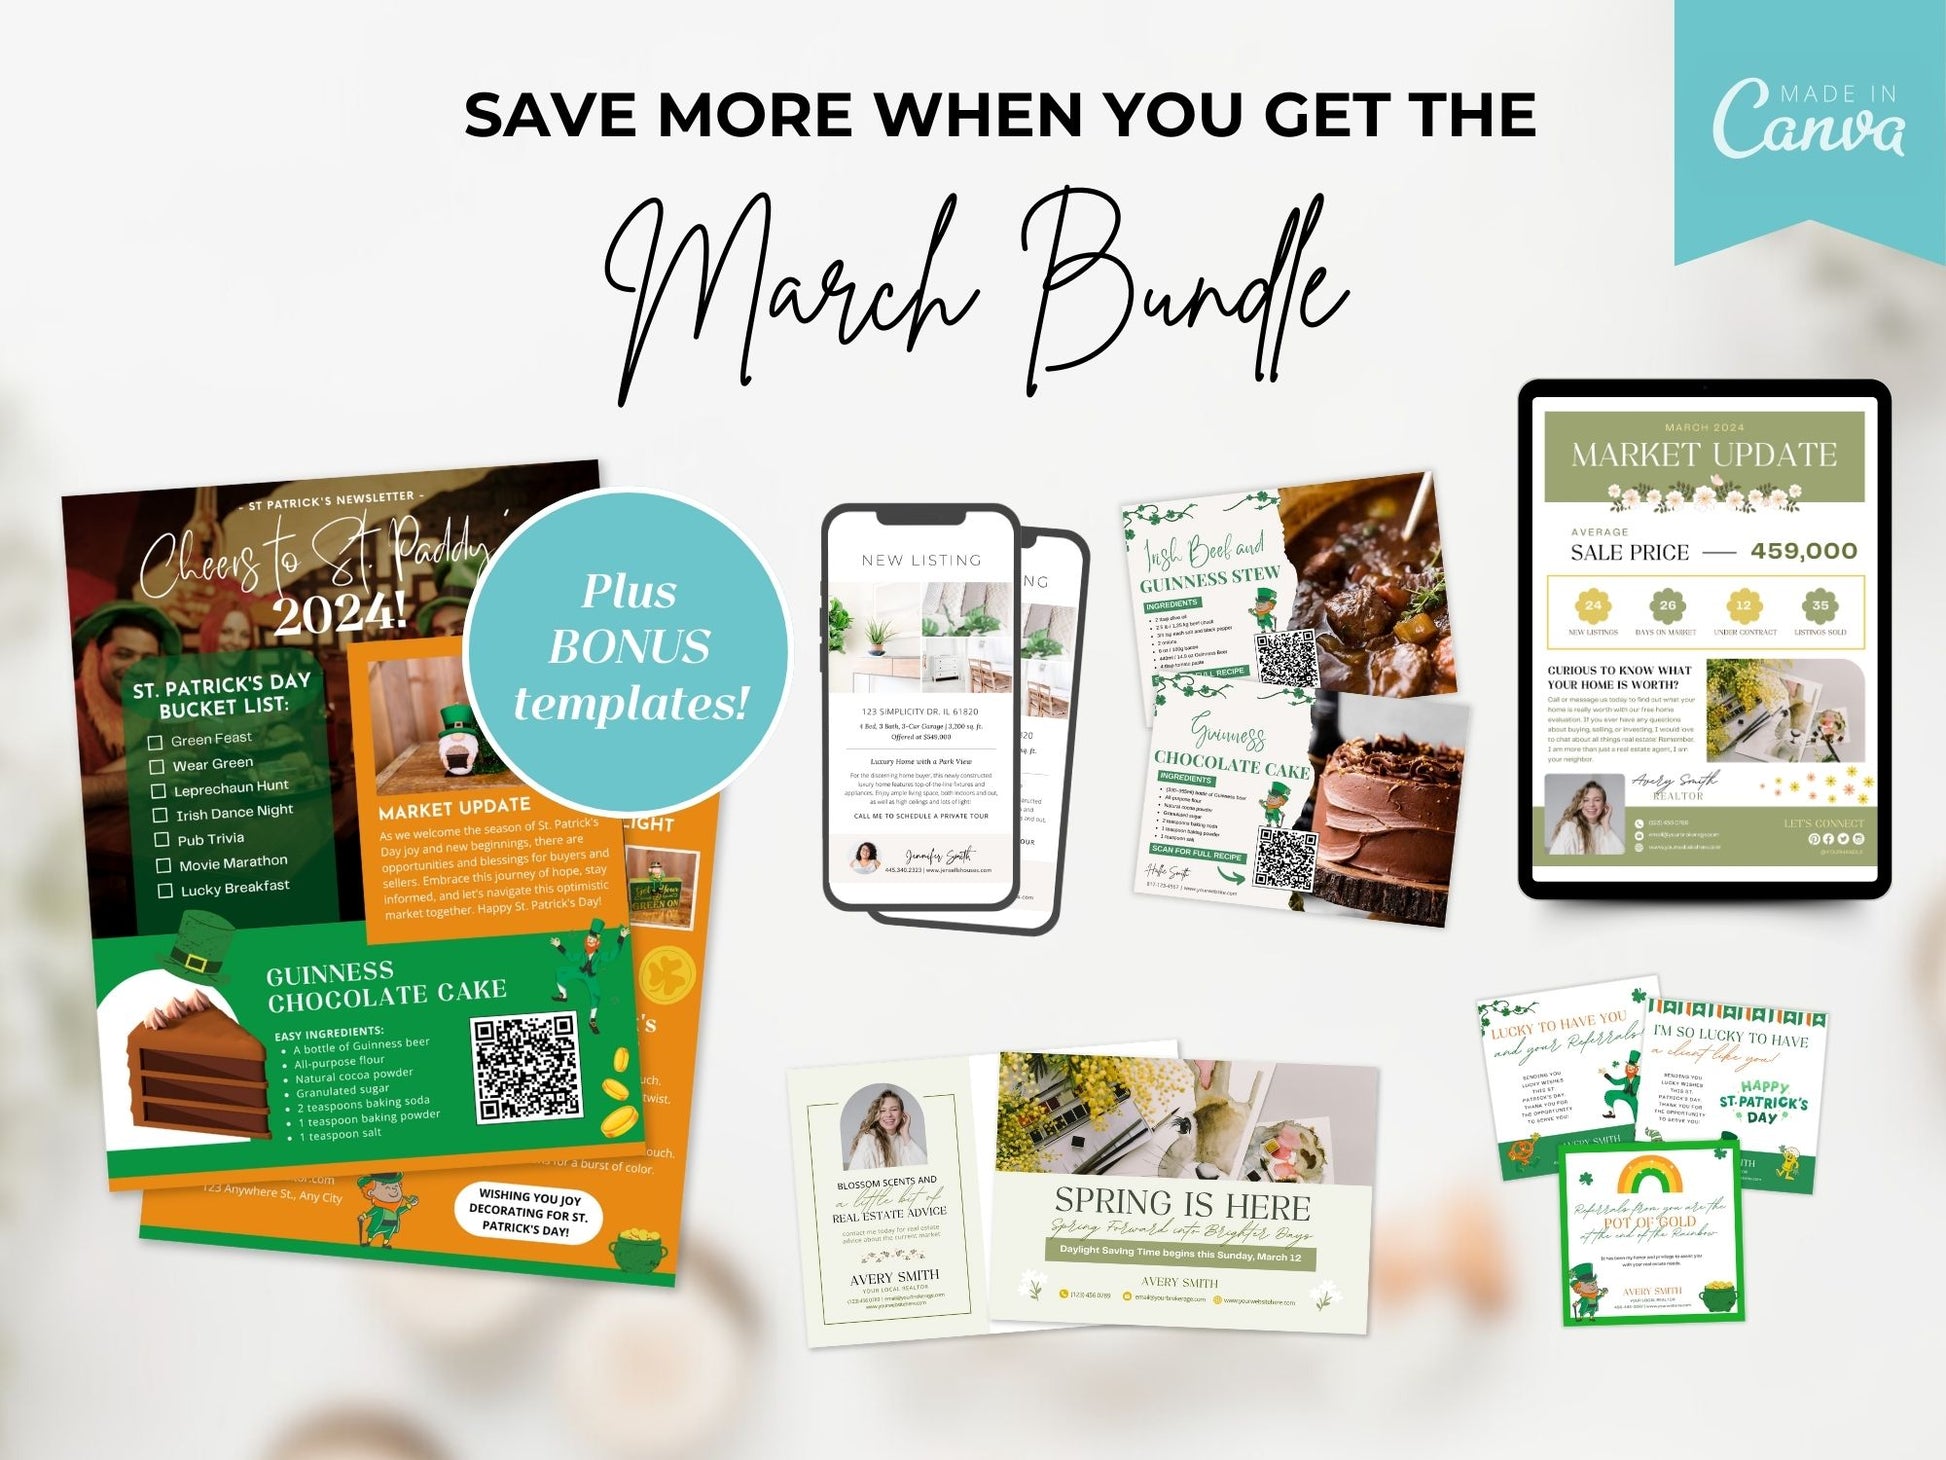 March Farming Bundle - Comprehensive tools for real estate farming and community engagement in March.